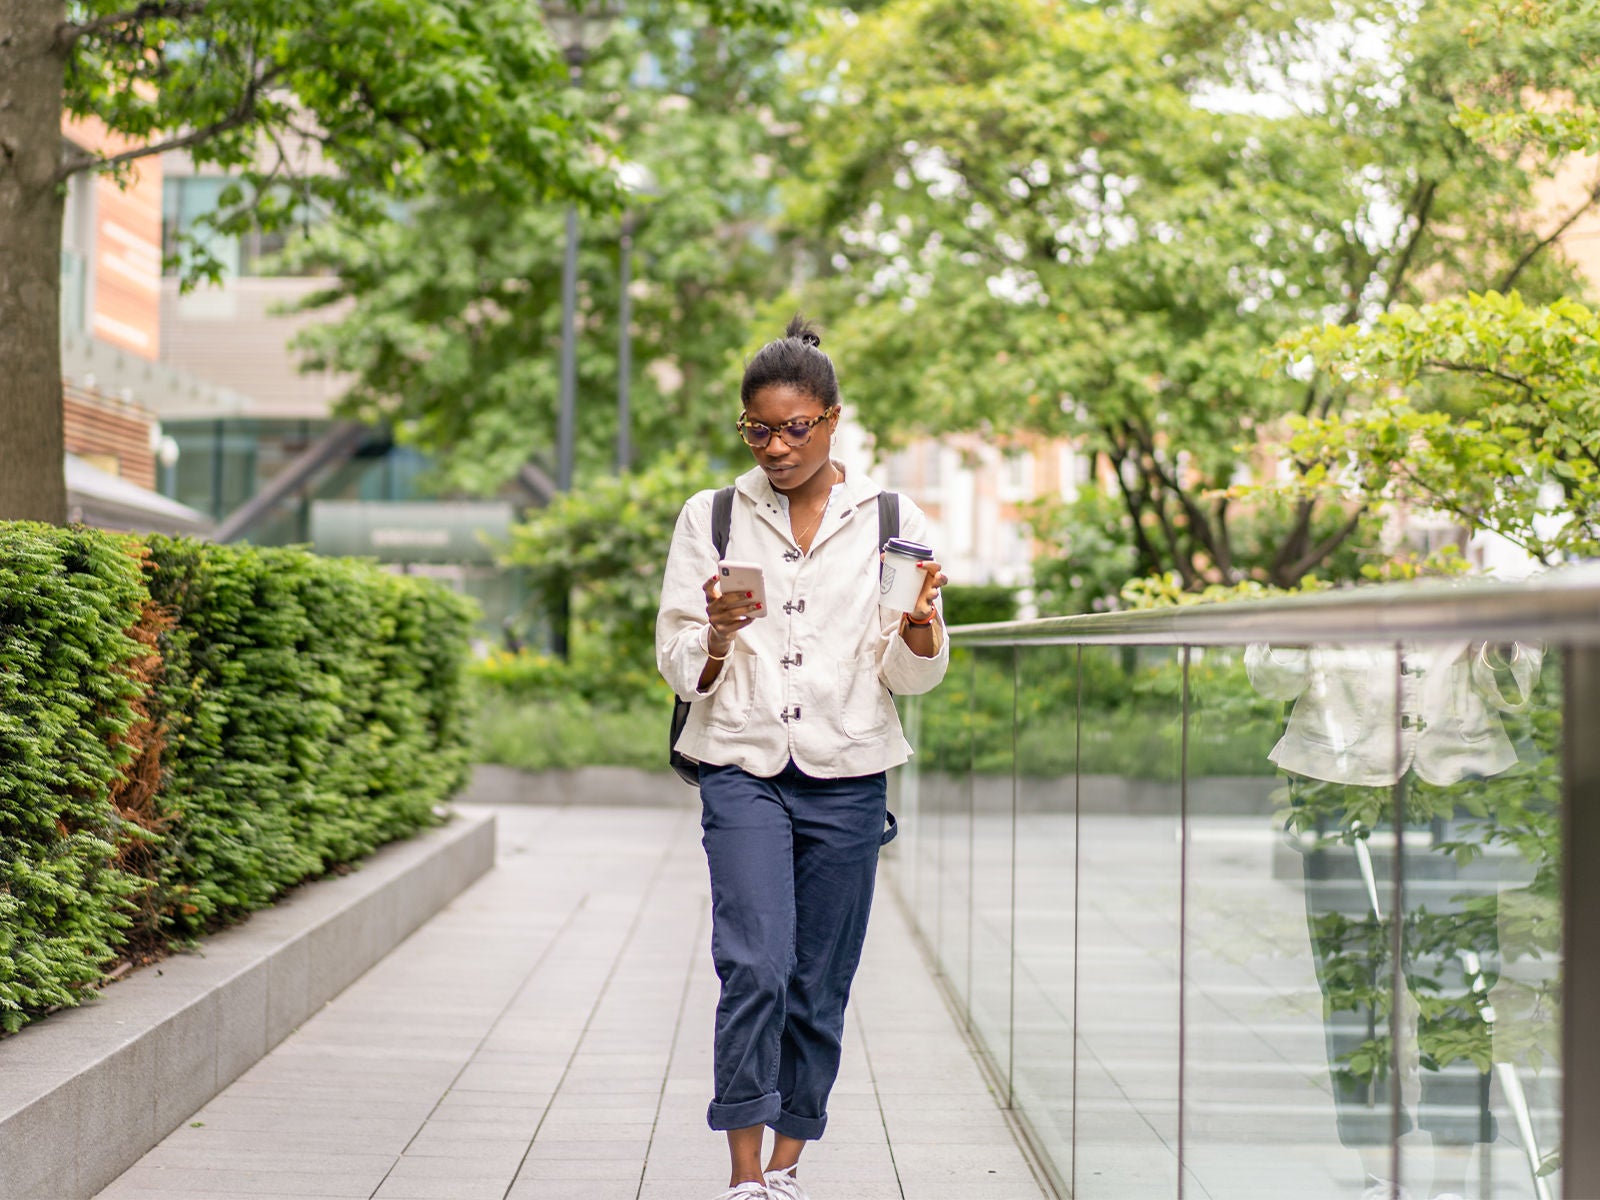 A student walking outside on a school campus, holding a coffee cup in one hand, and looking at her cellphone.